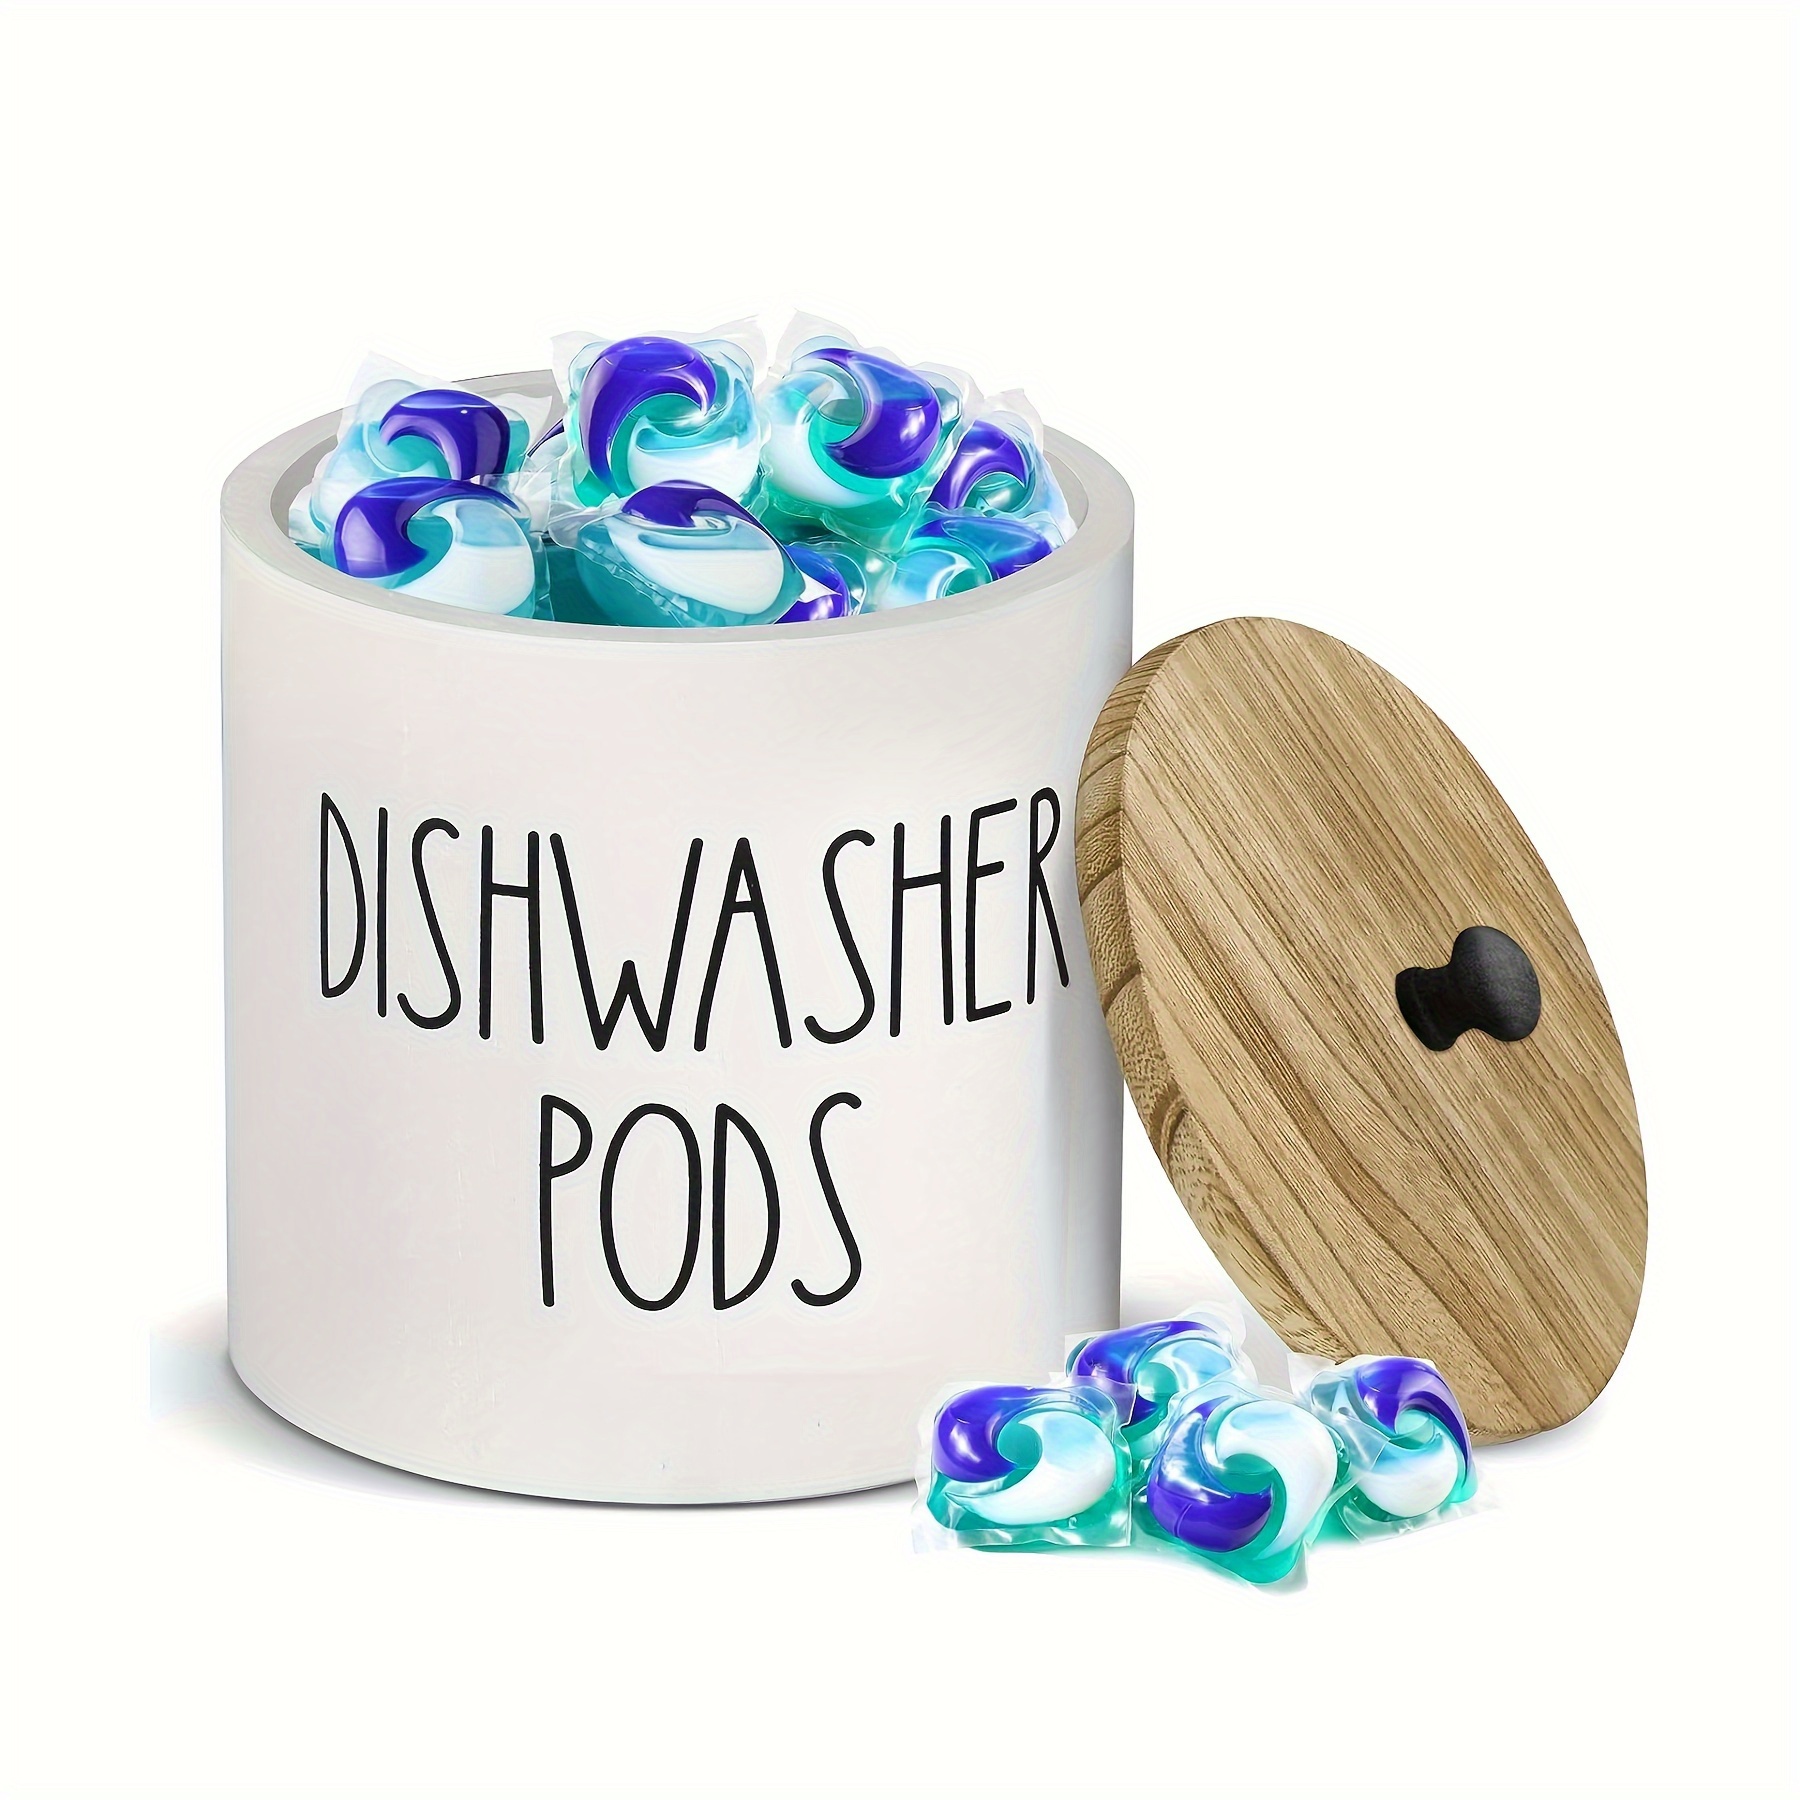 Farmhouse Dishwasher Pod Tablet Holder，Dishwasher Detergent Pod Container  with Lid，Metal Storage Container for Dishwasher in Kitchen for Storage and